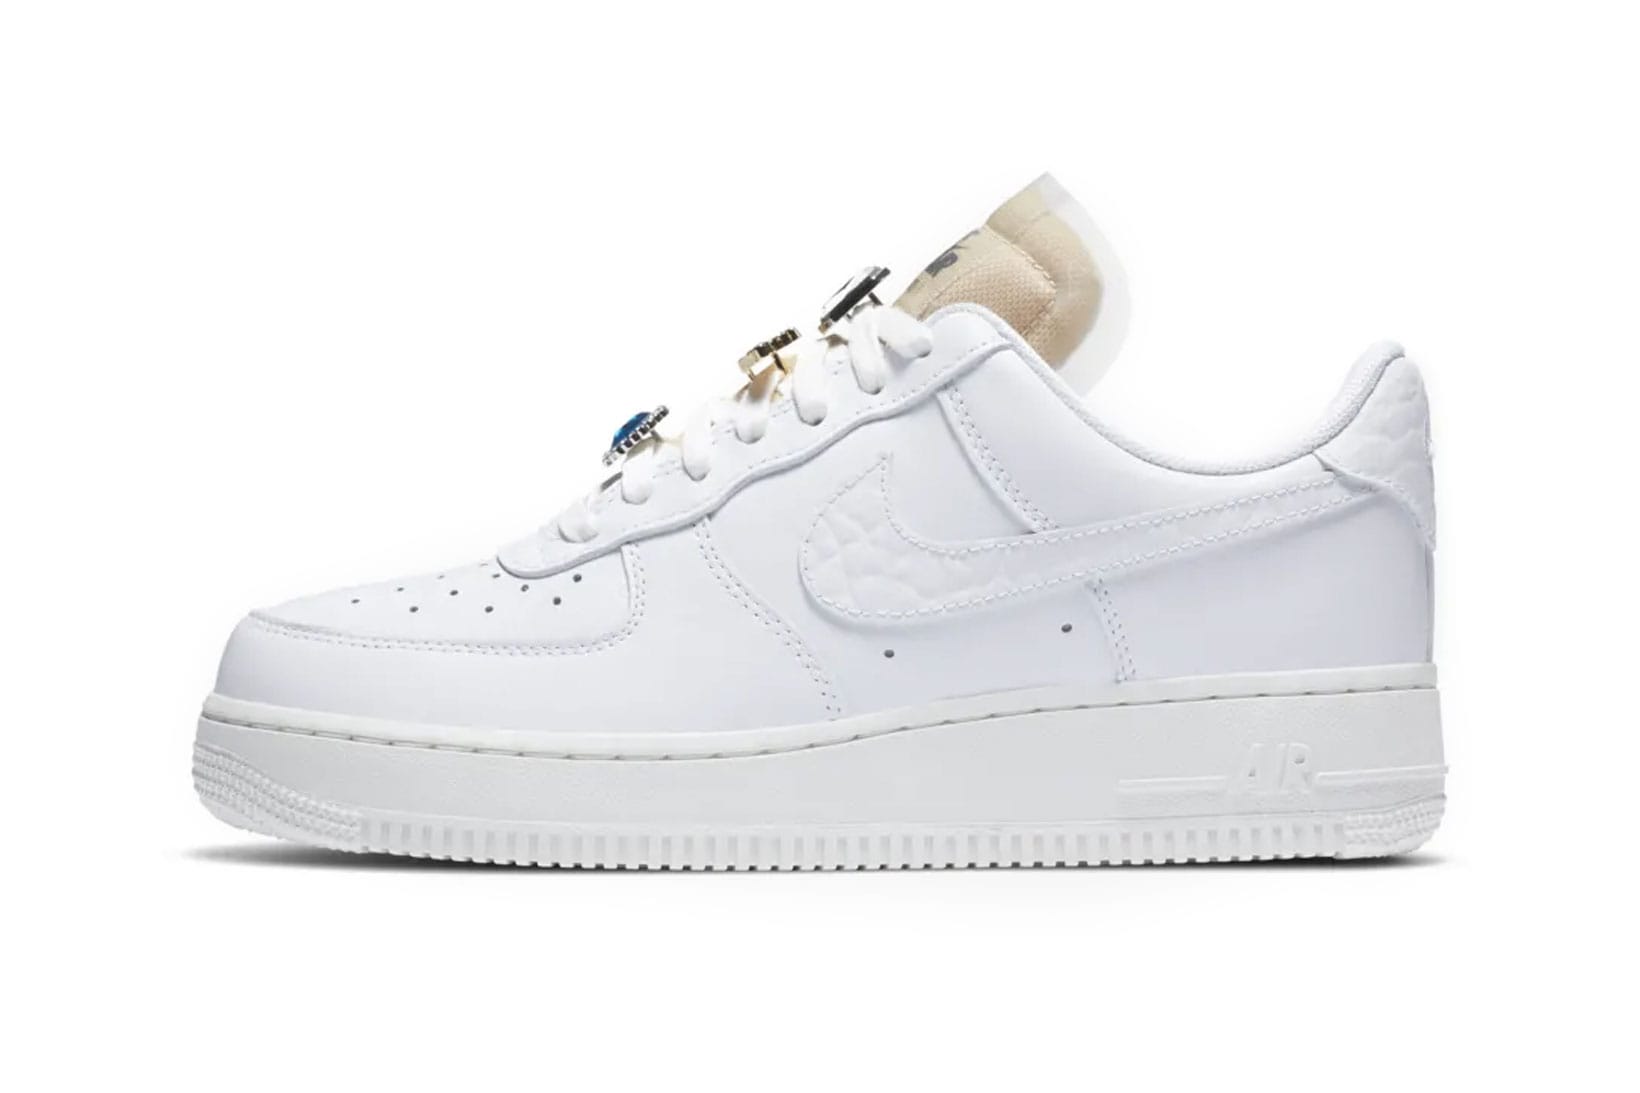 white air forces with black laces